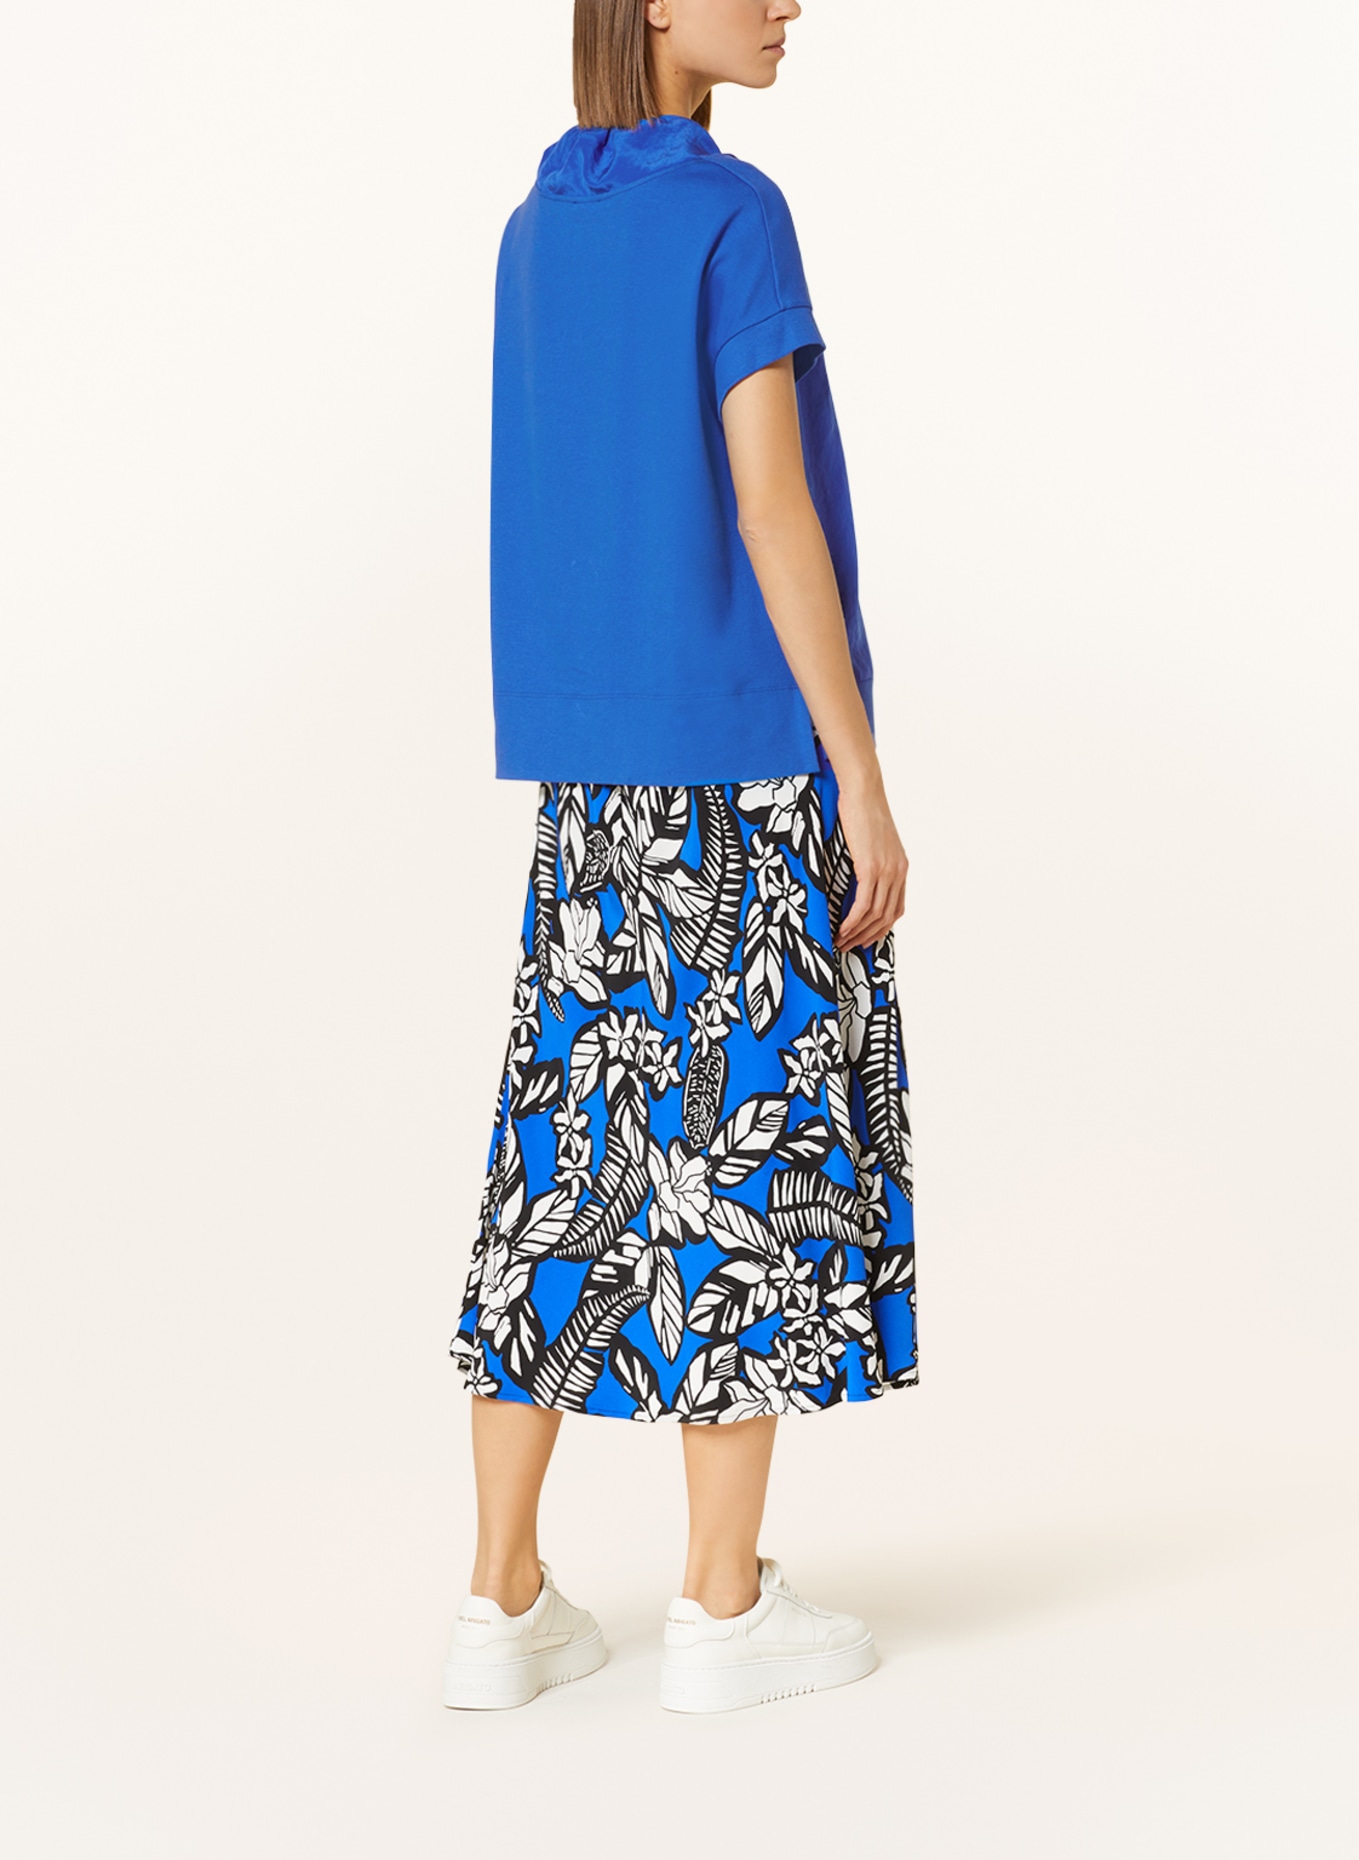 MARC CAIN T-shirt in mixed materials, Color: 365 bright royal blue (Image 3)